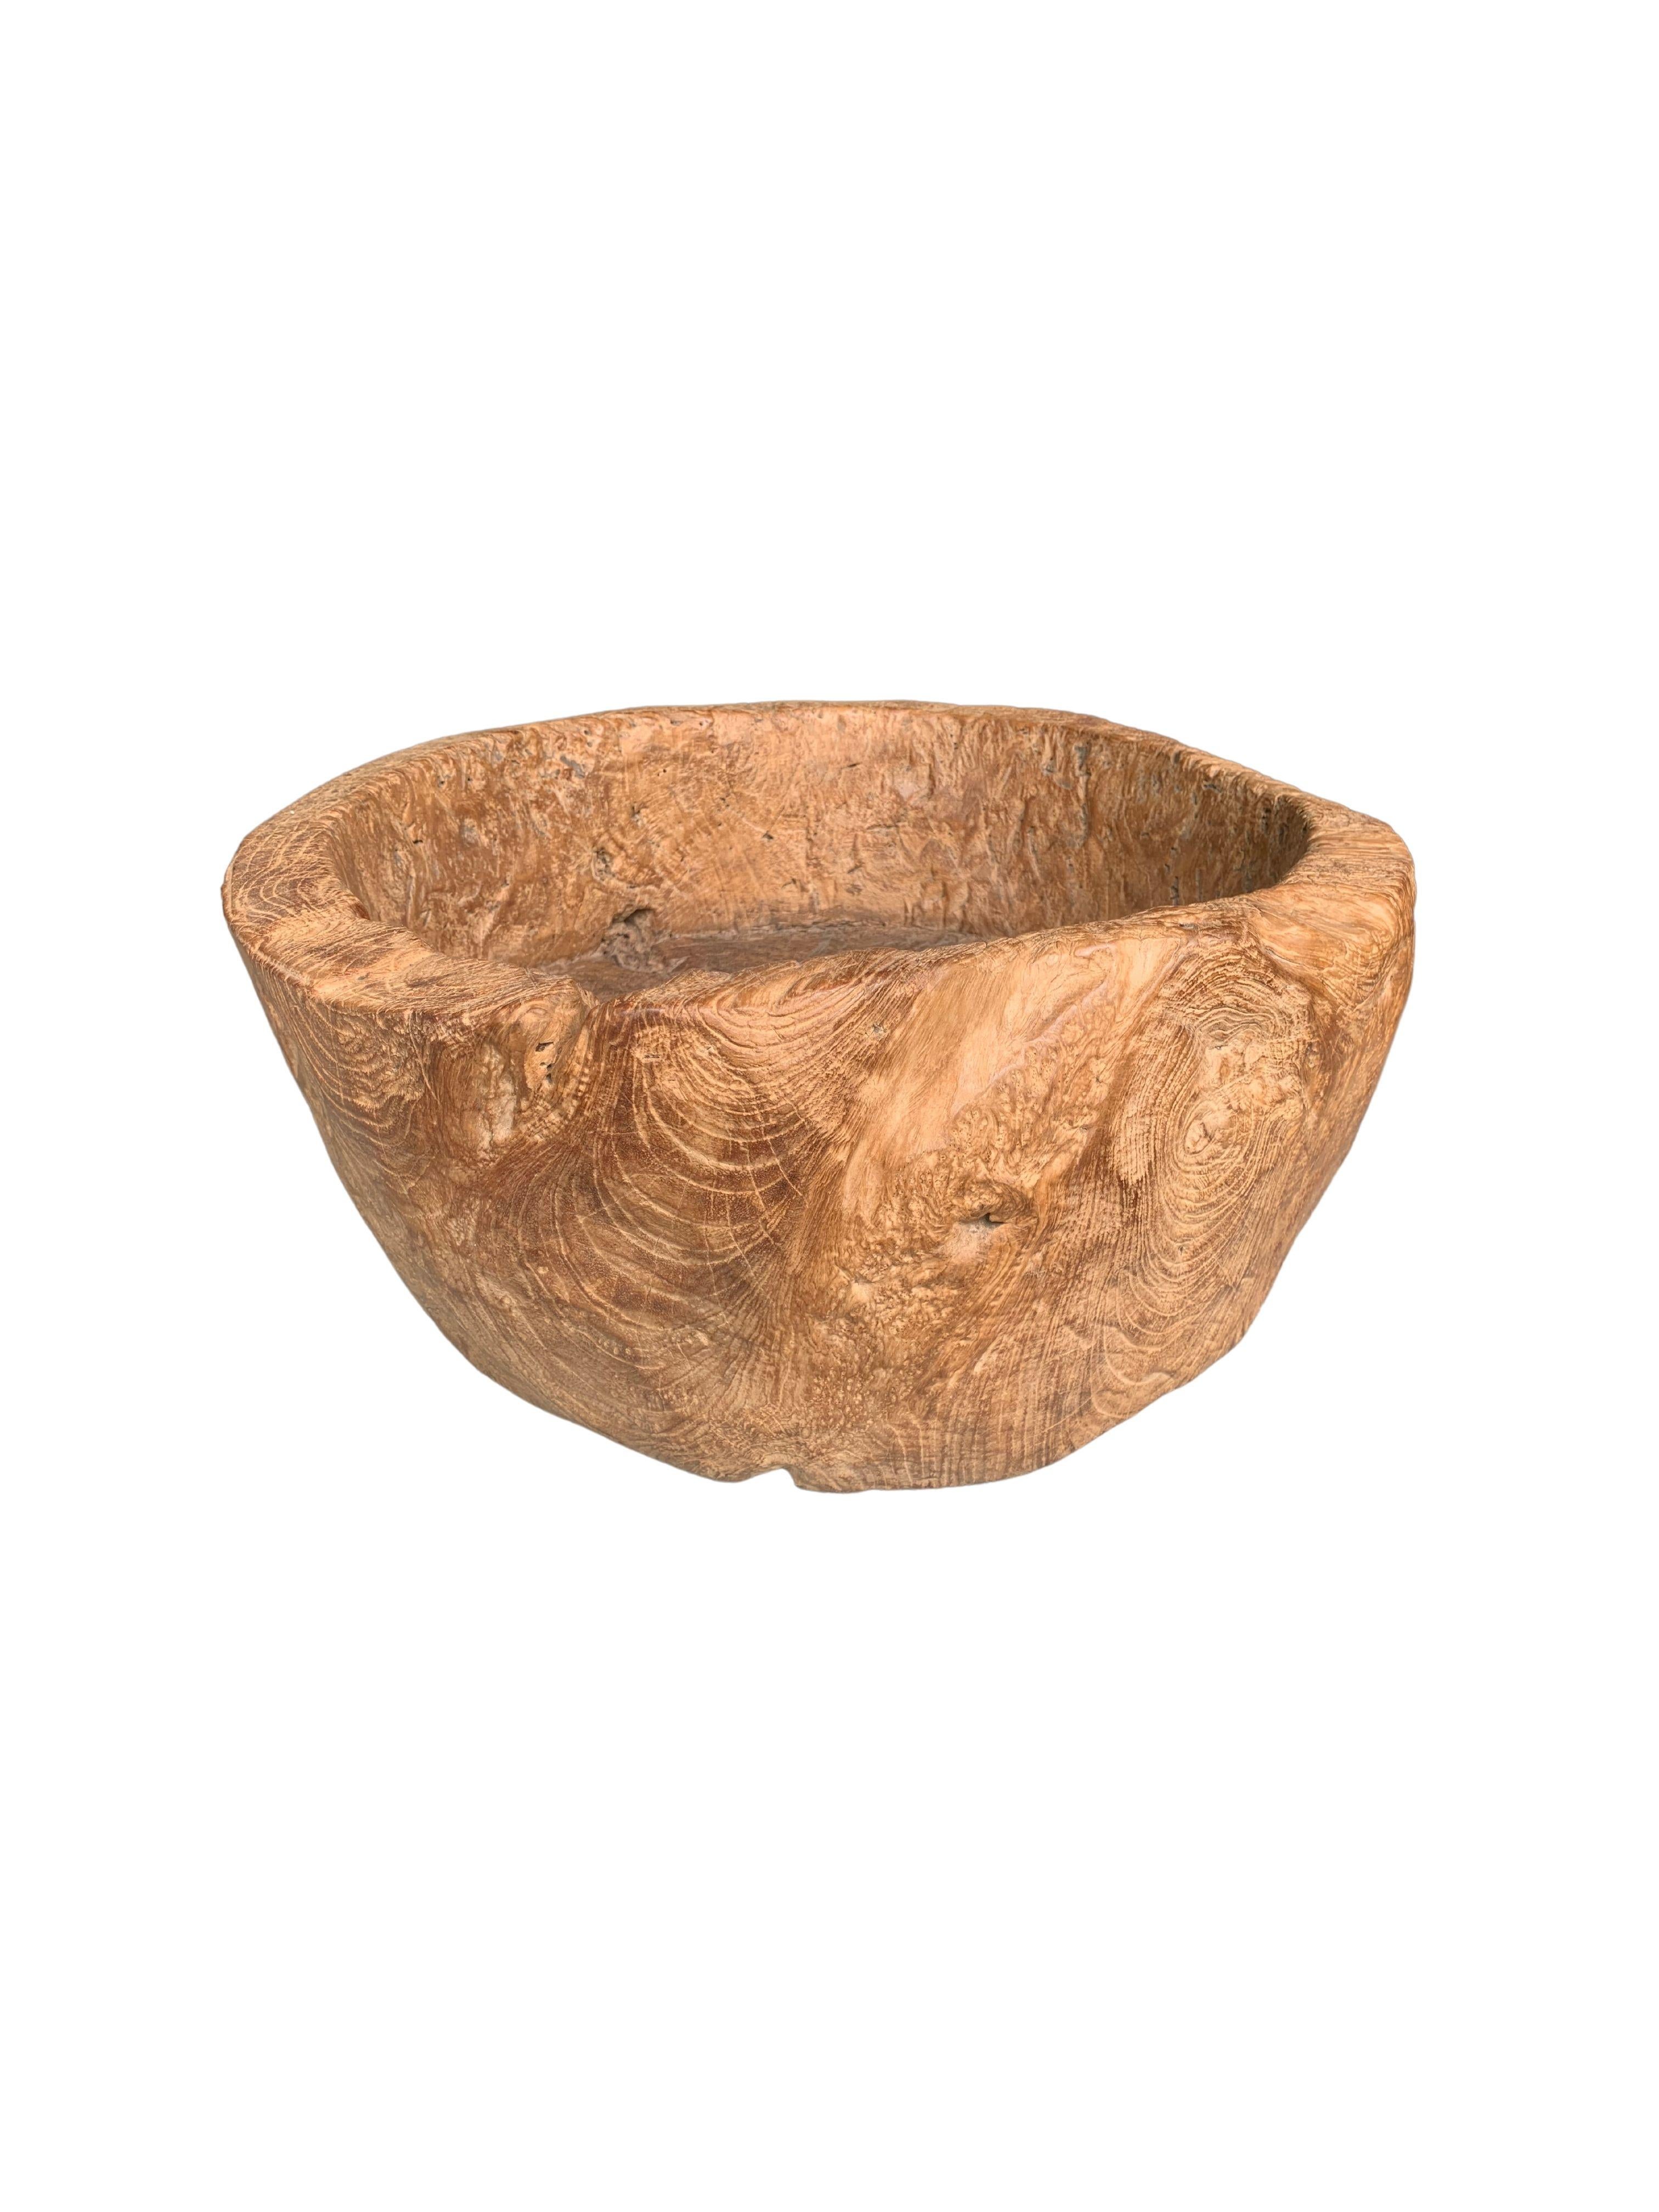 20th Century Vintage Solid Teak Wood Bowl from Java, Indonesia For Sale